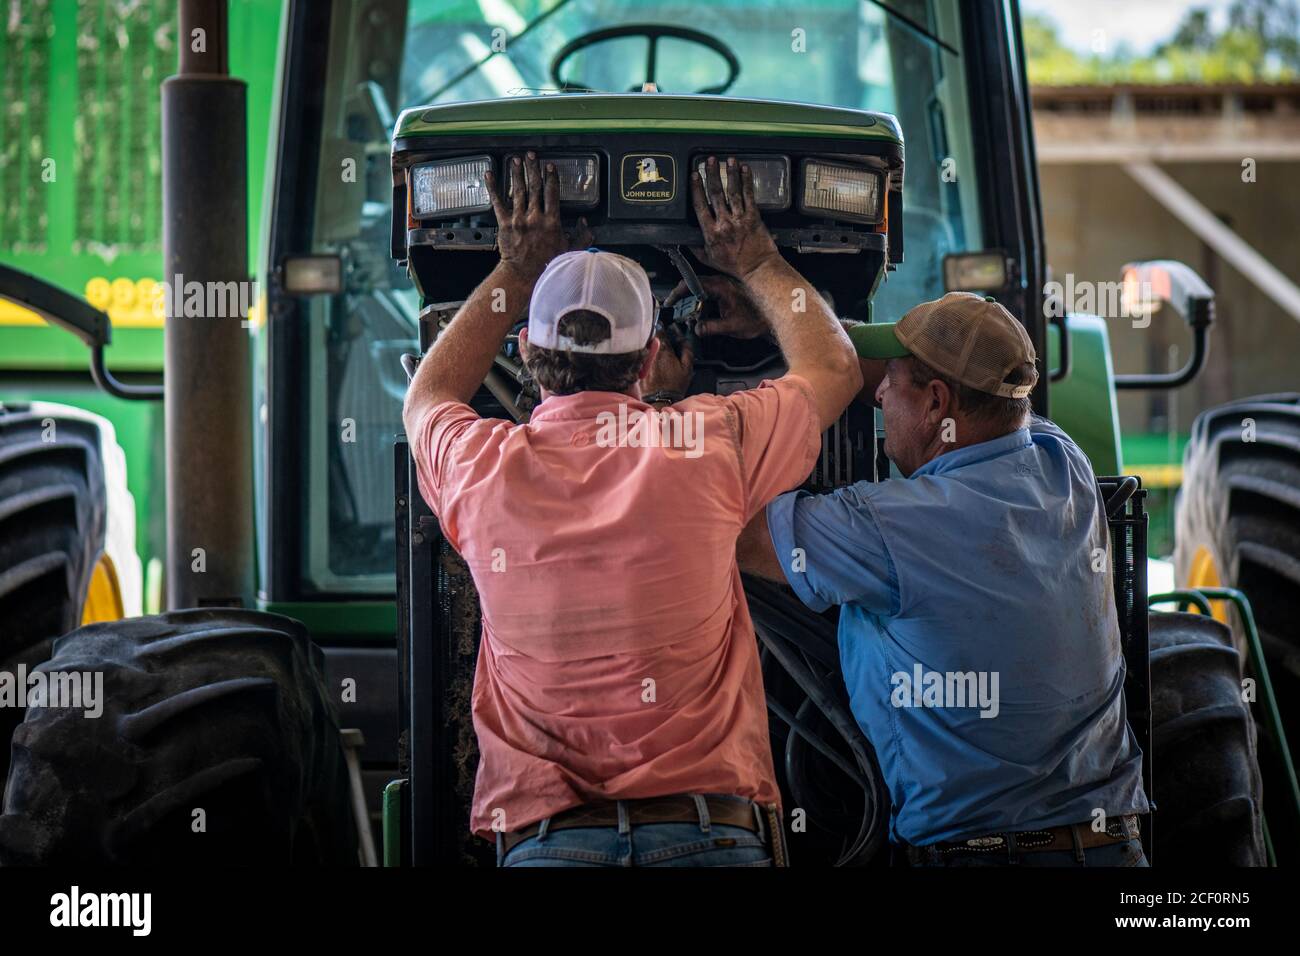 Schirmer Farms (Batesville) Operations Manager Brandon Schirmer, assisted by farm owner and father Ernie Schirmer, puts their John Deere tractor back together, near San Antonio, TX, on August 11, 2020.  They are performing needed farm equipment repairs and maintenance in preparation for the upcoming cotton harvest. Stock Photo